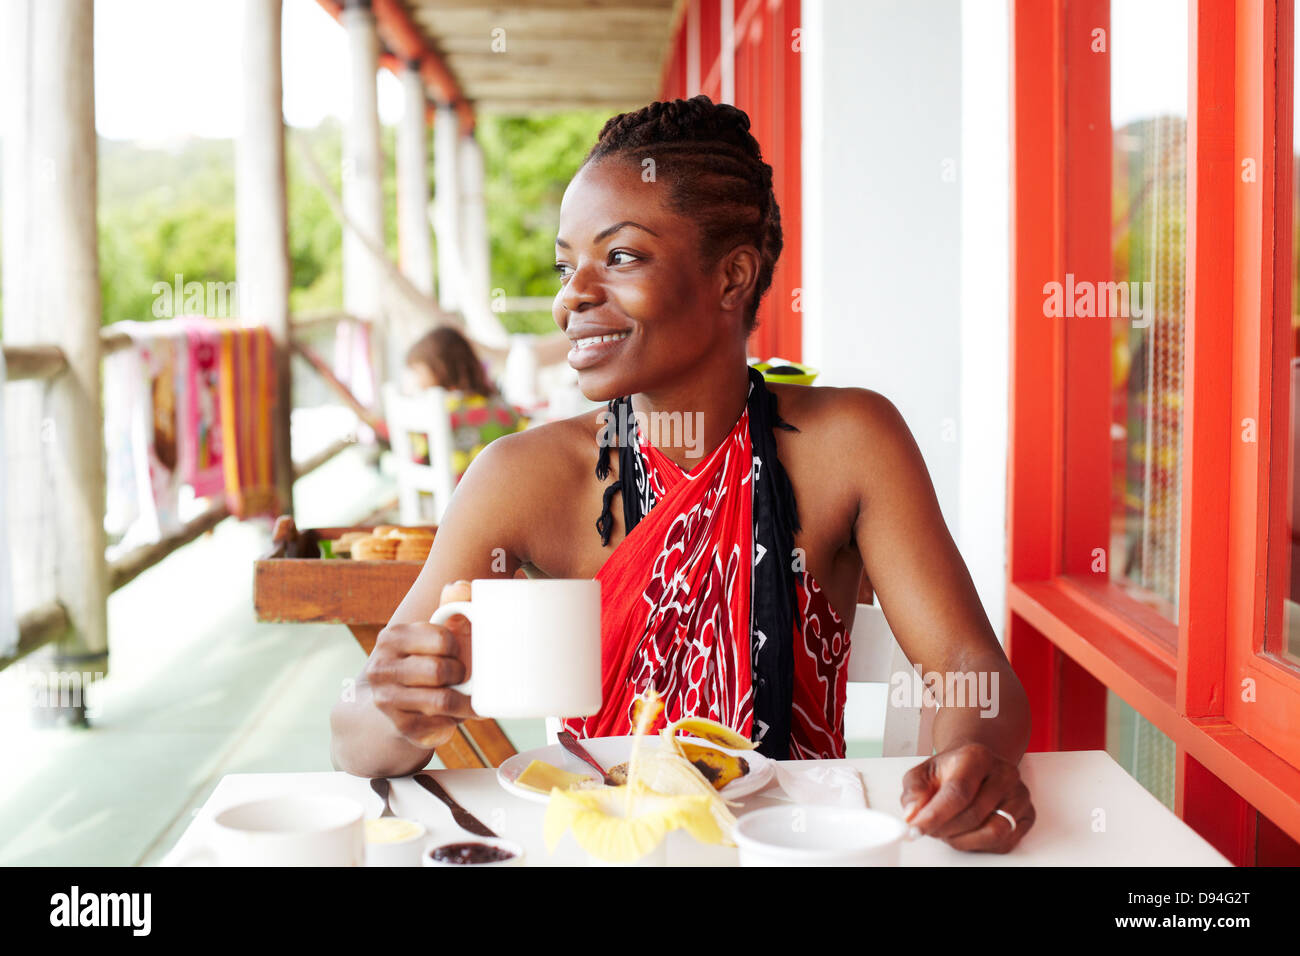 Black woman smiling at lunch Stock Photo